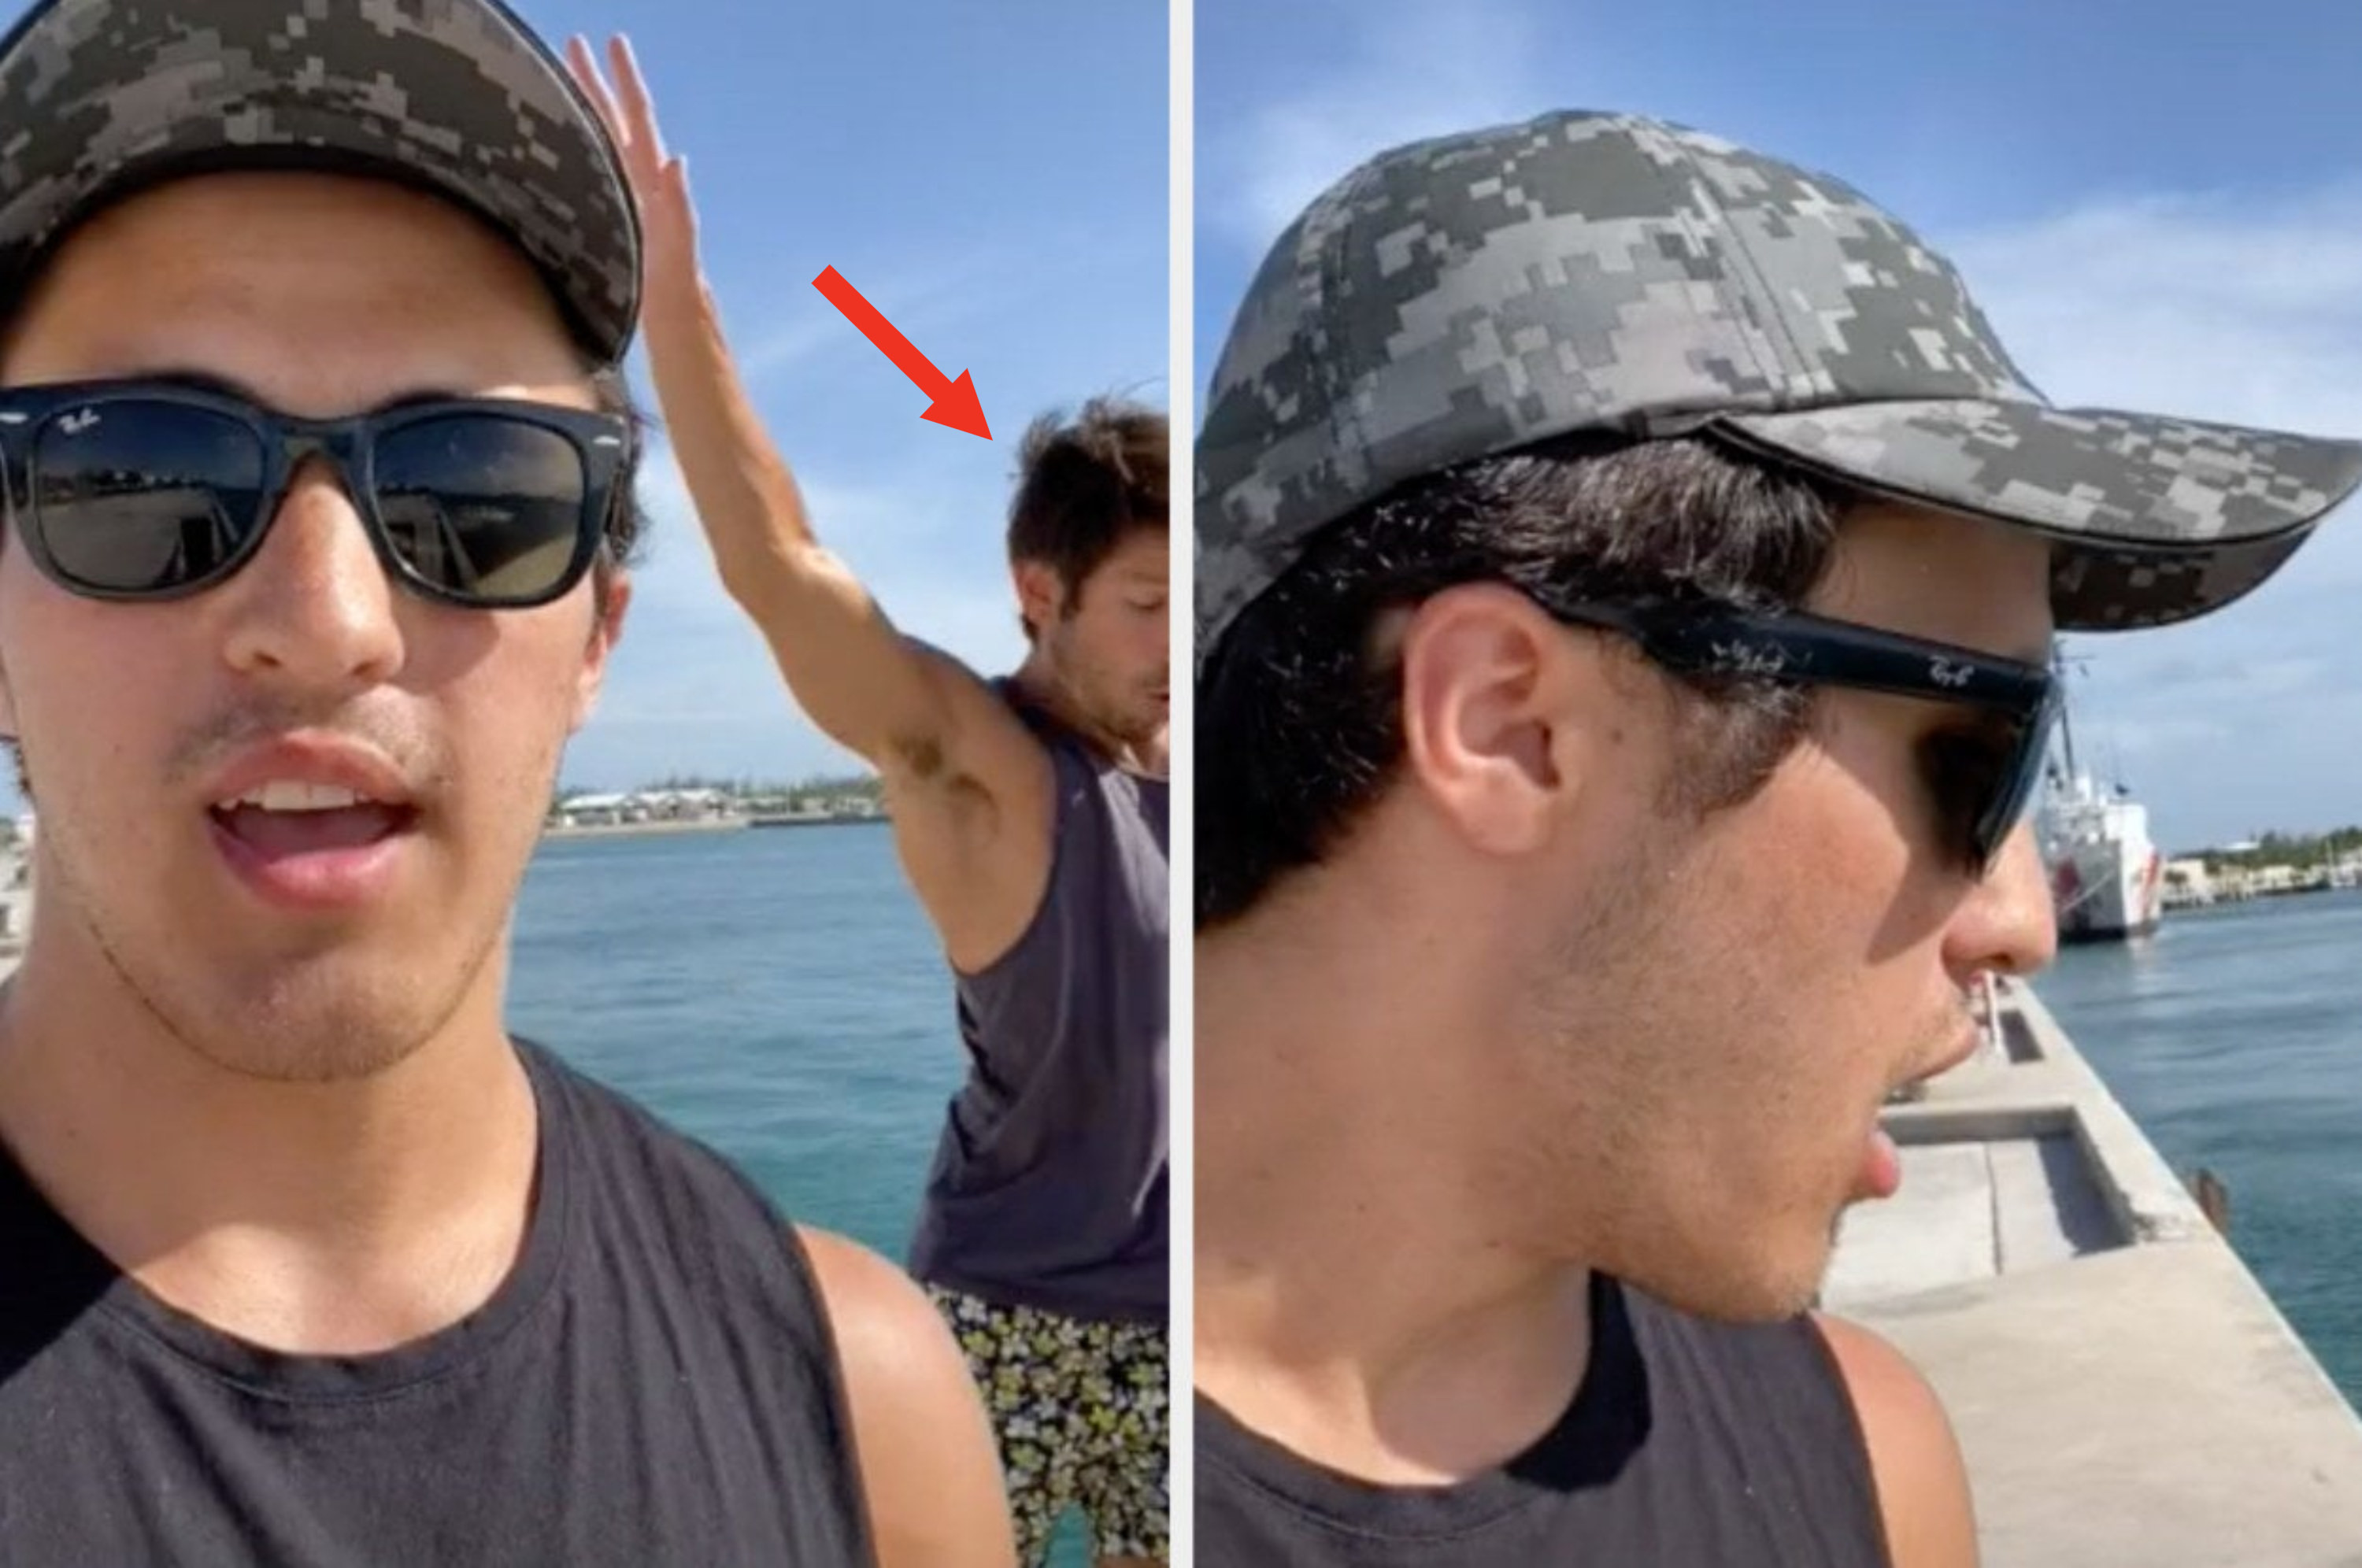 A TikToker vlogs on vacation as someone behind them trips and falls into water